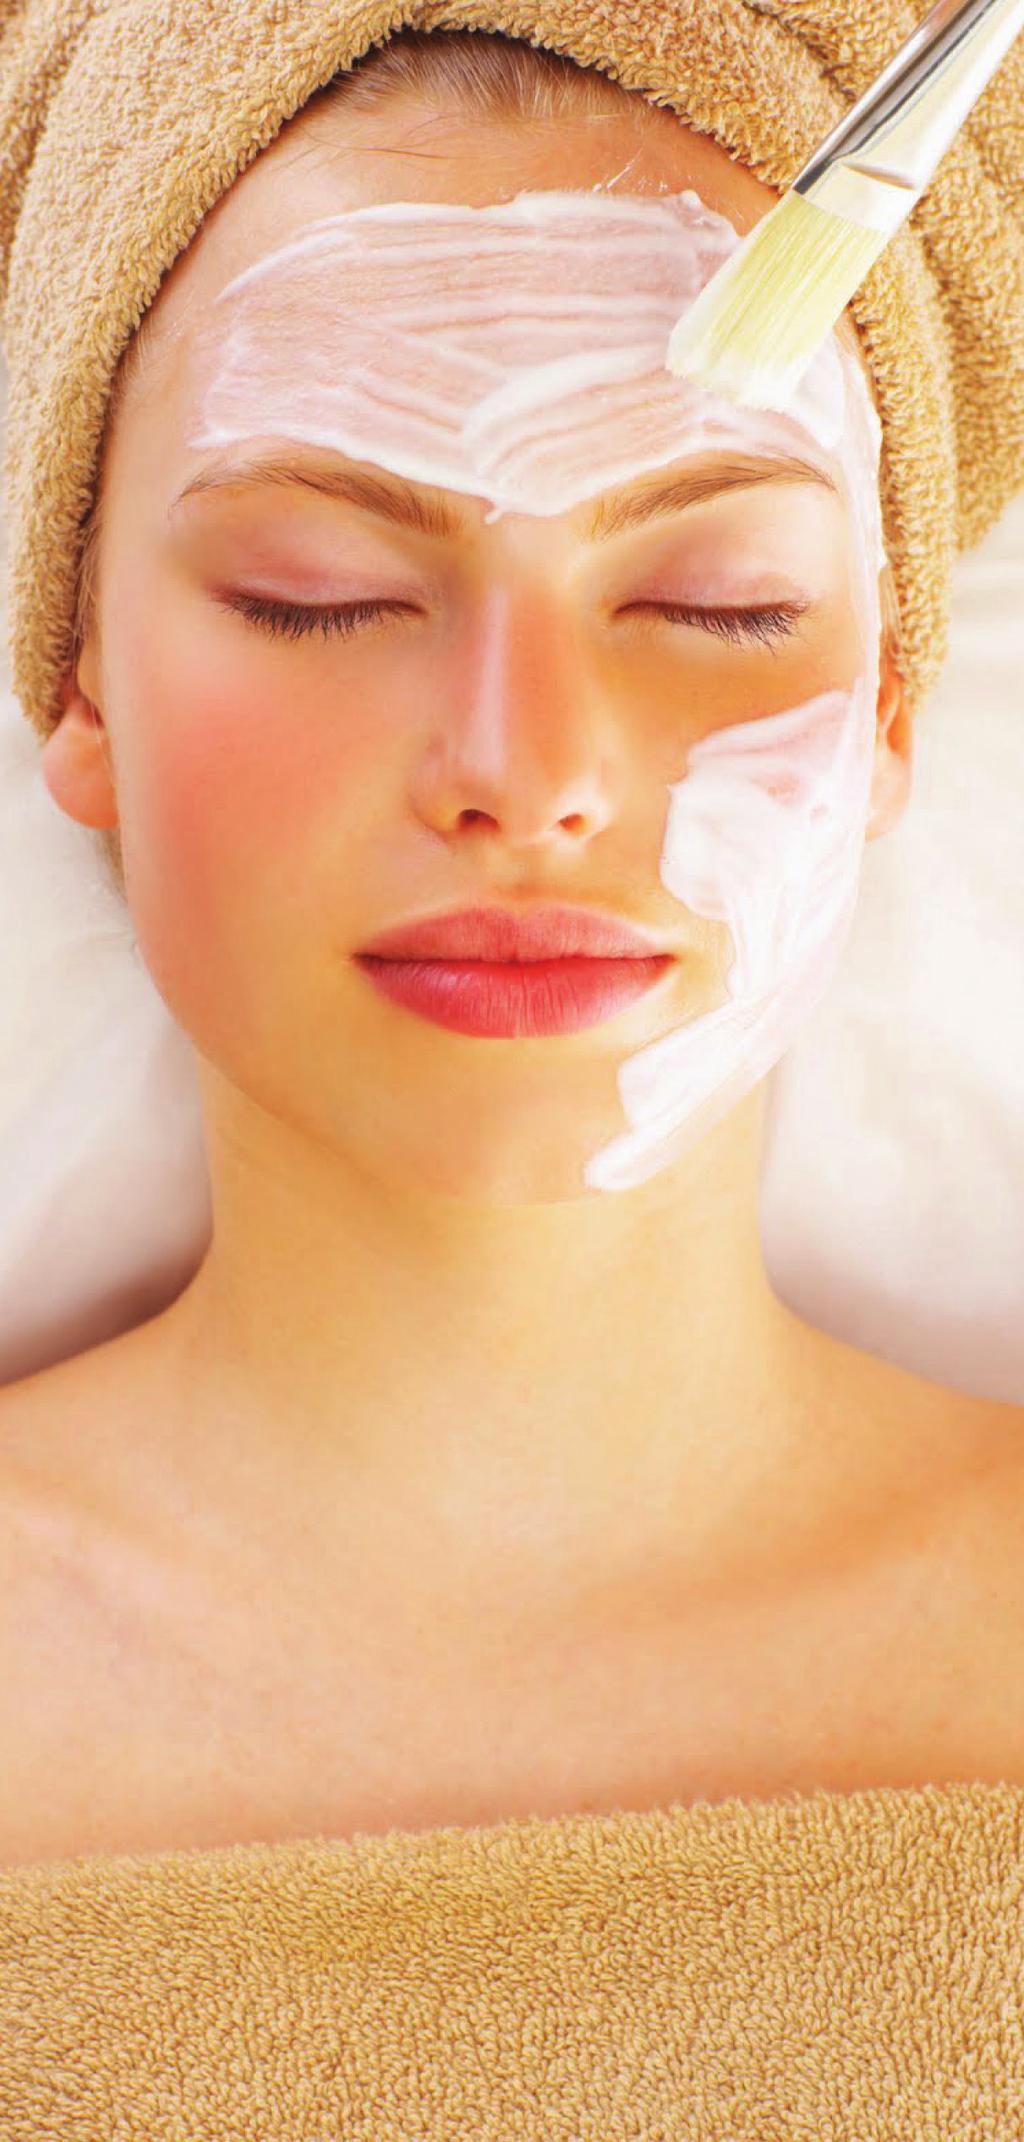 OUR SIGNATURE RITUALS VATHA - AYURVEDIC MOISTURIZING FACIAL 60 MIN AED 350 This facial uses a customized blend of pure, Vatha dosha specific essential oils, botanical extracts and herbal preparations.